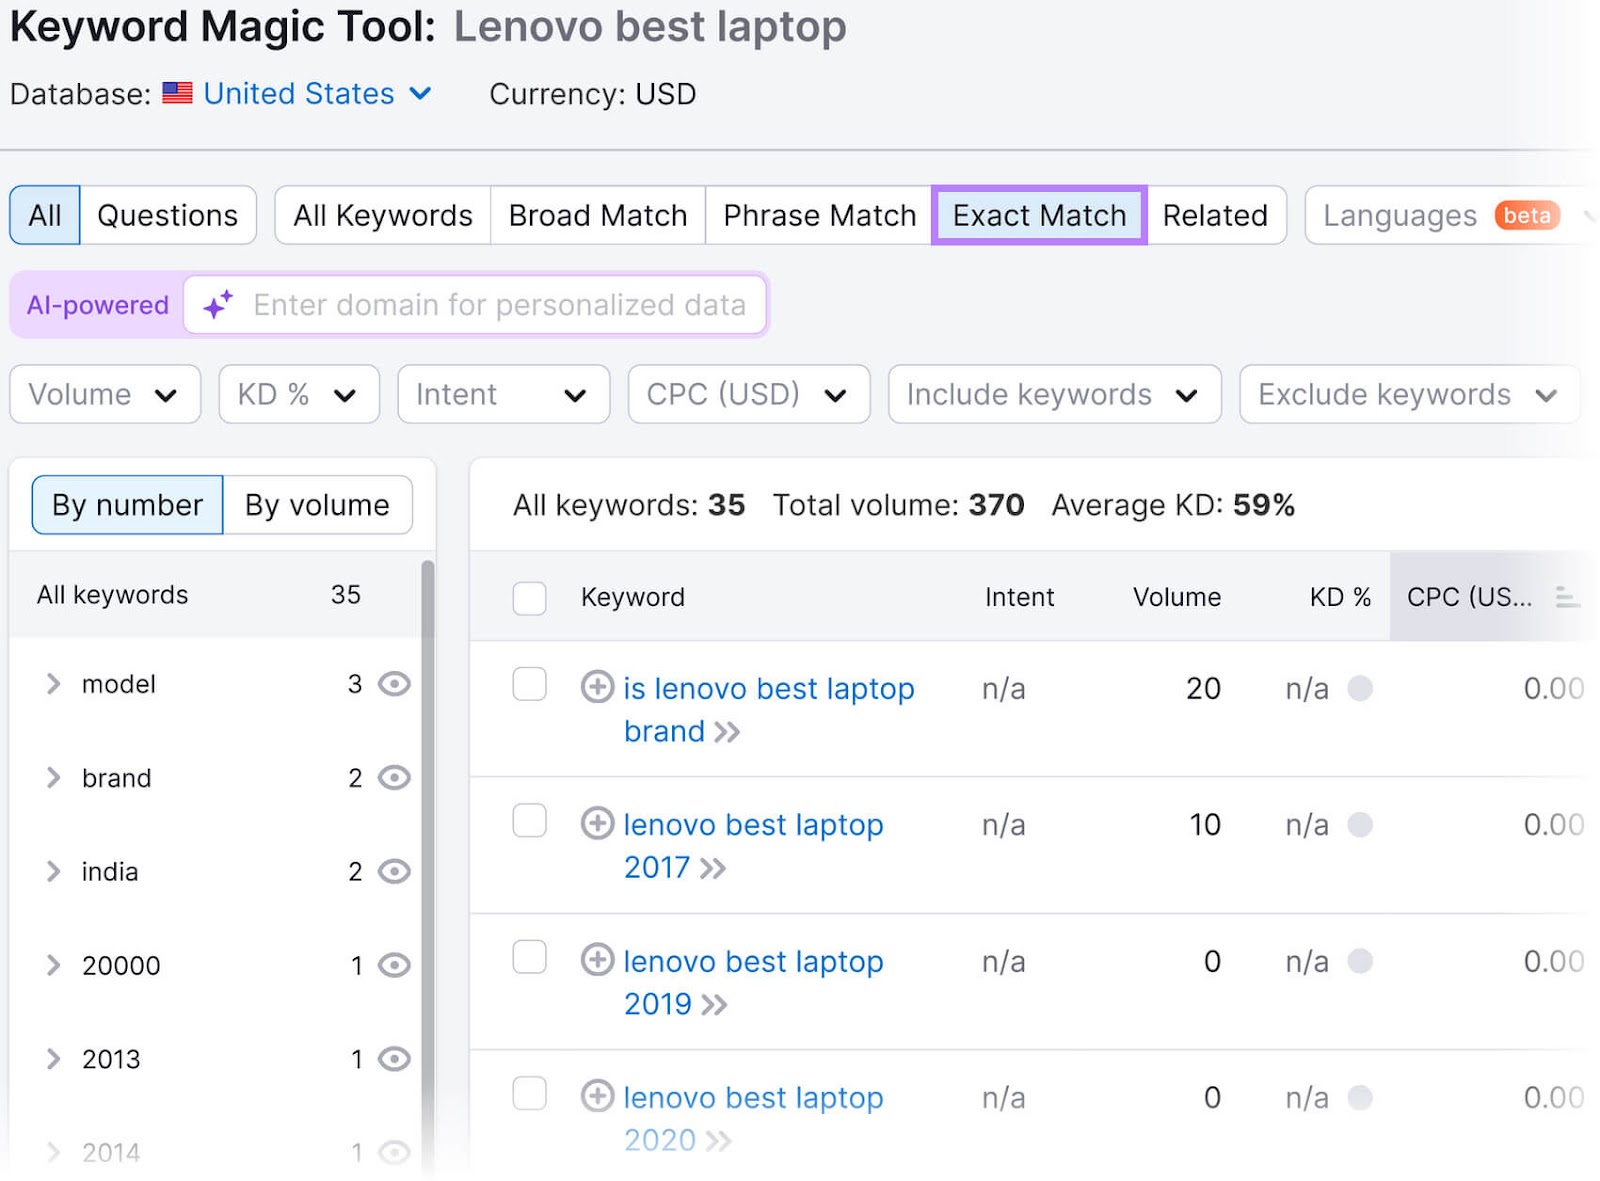 Keyword Magic Tool interface, showing directly below the title a navigation menu with "Exact Match" highlighted in purple.